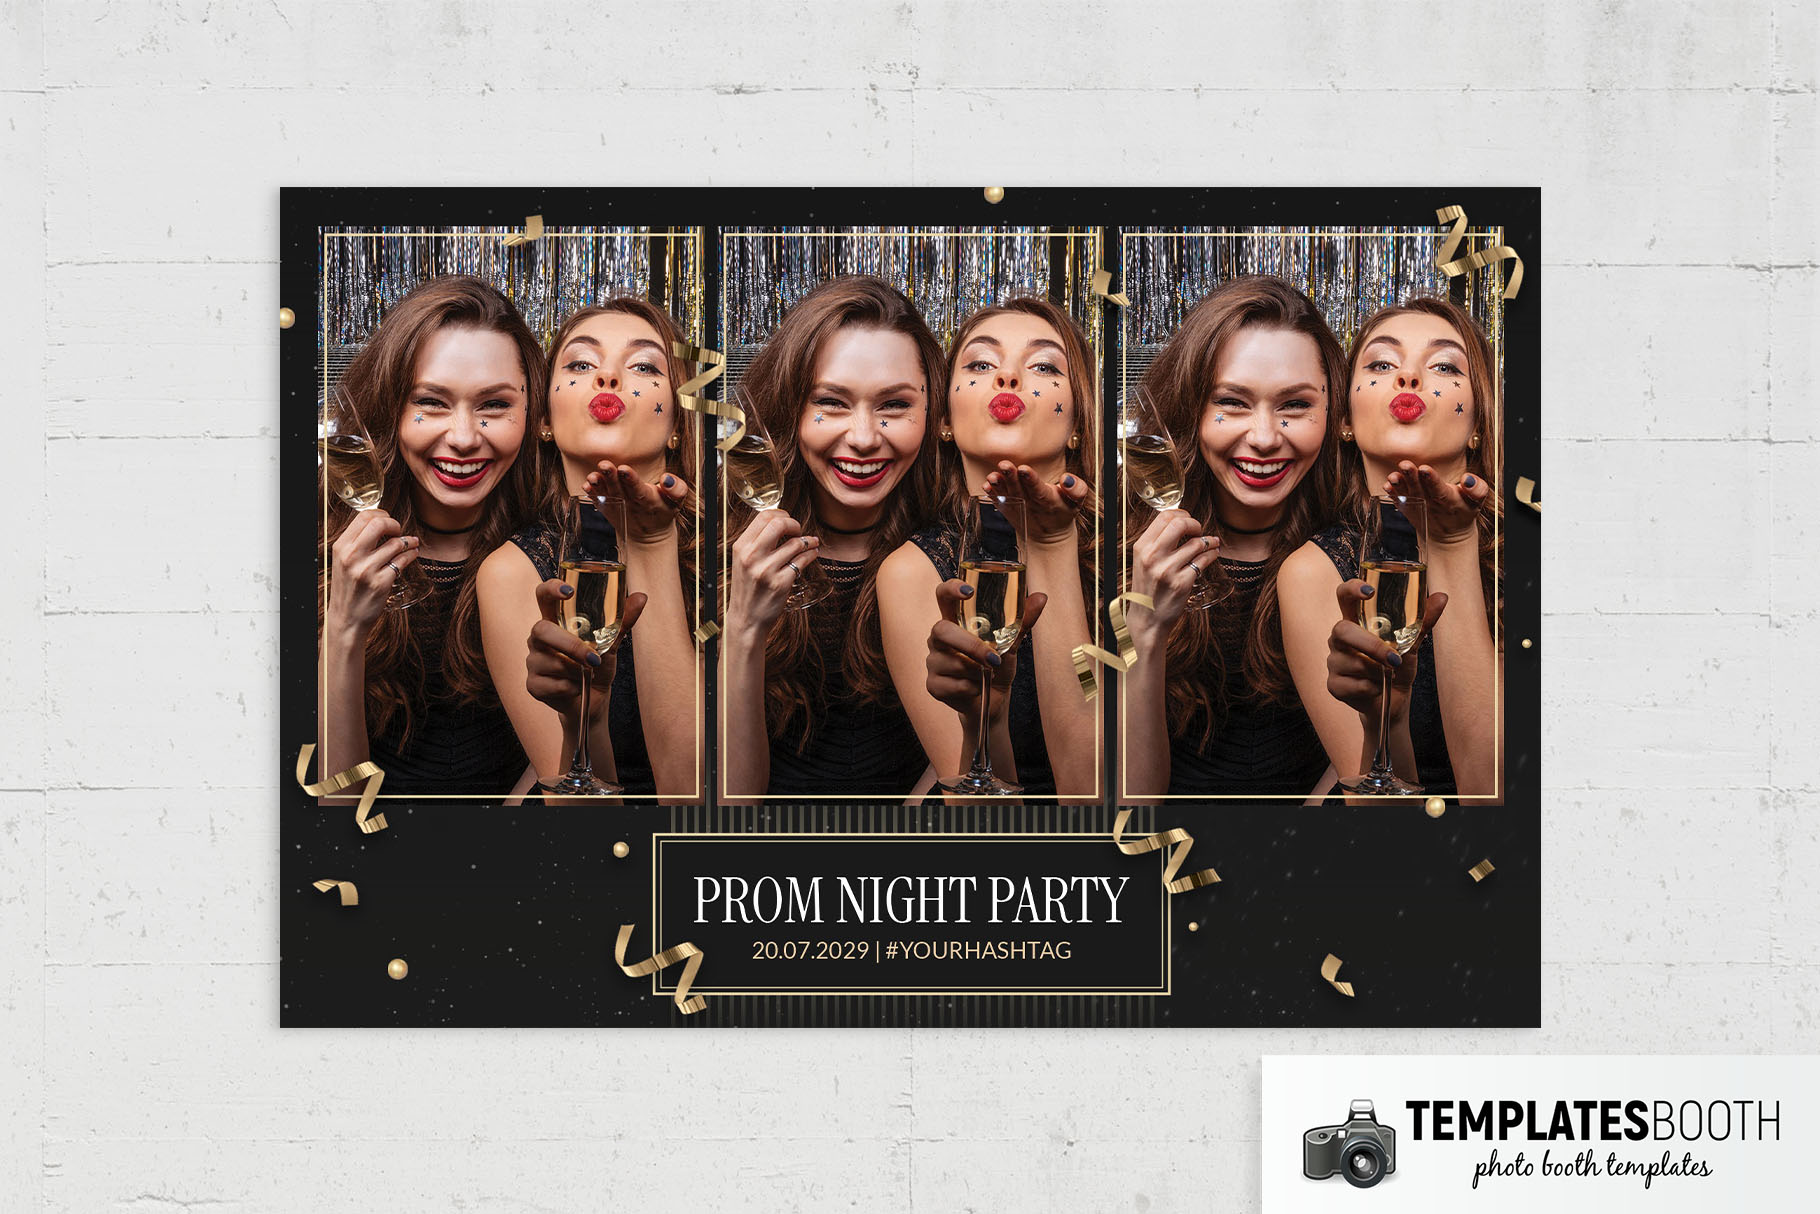 Prom Night Photo Booth Template